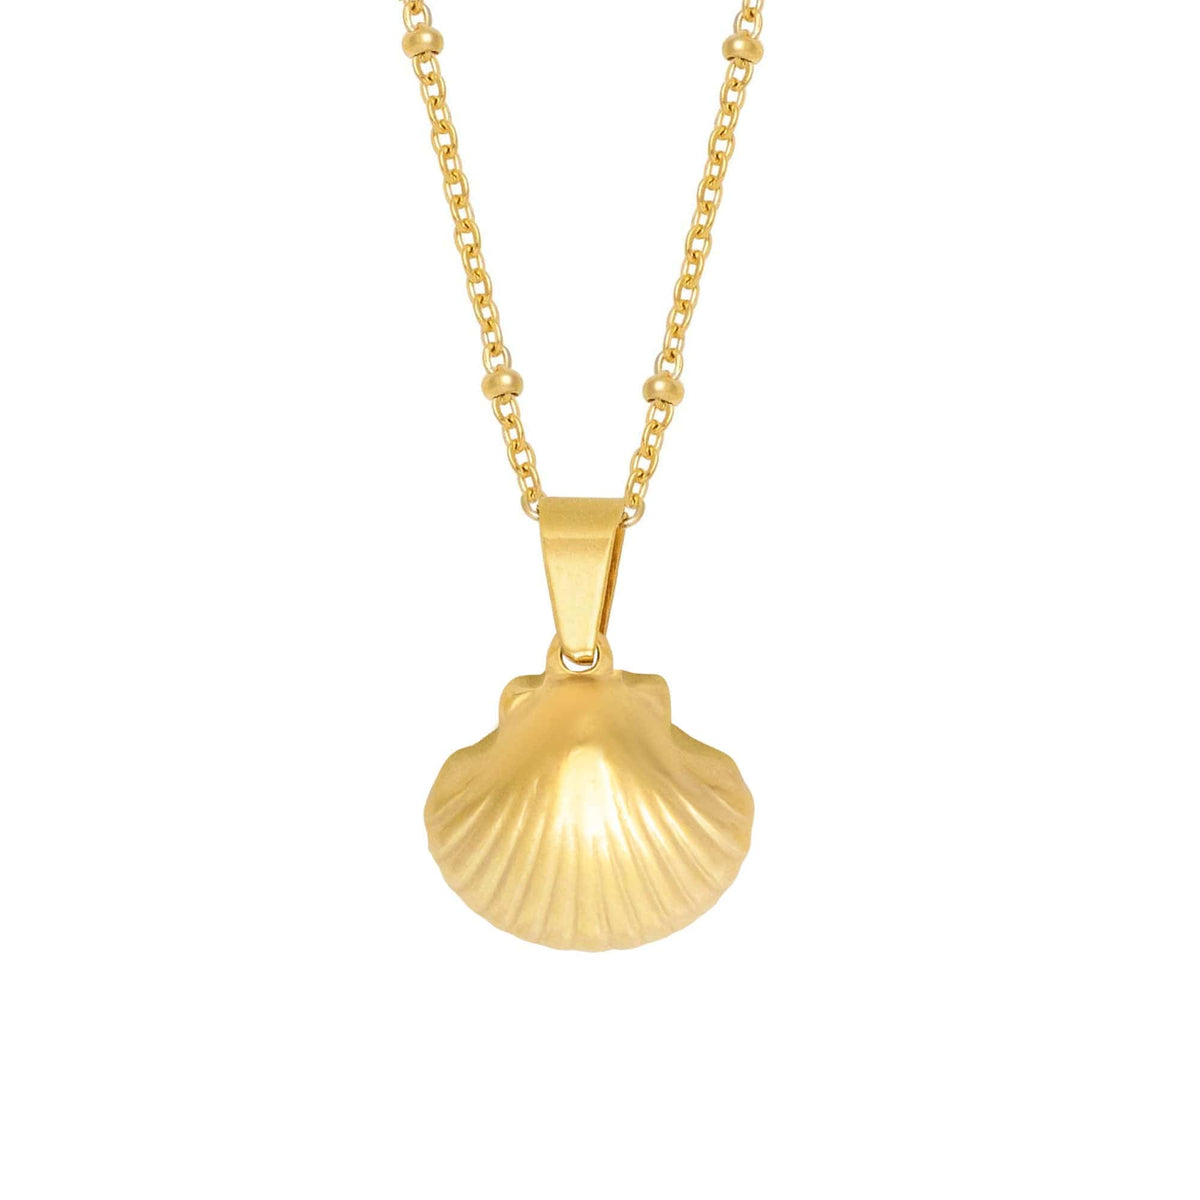 BohoMoon Stainless Steel Seychelles Necklace Gold